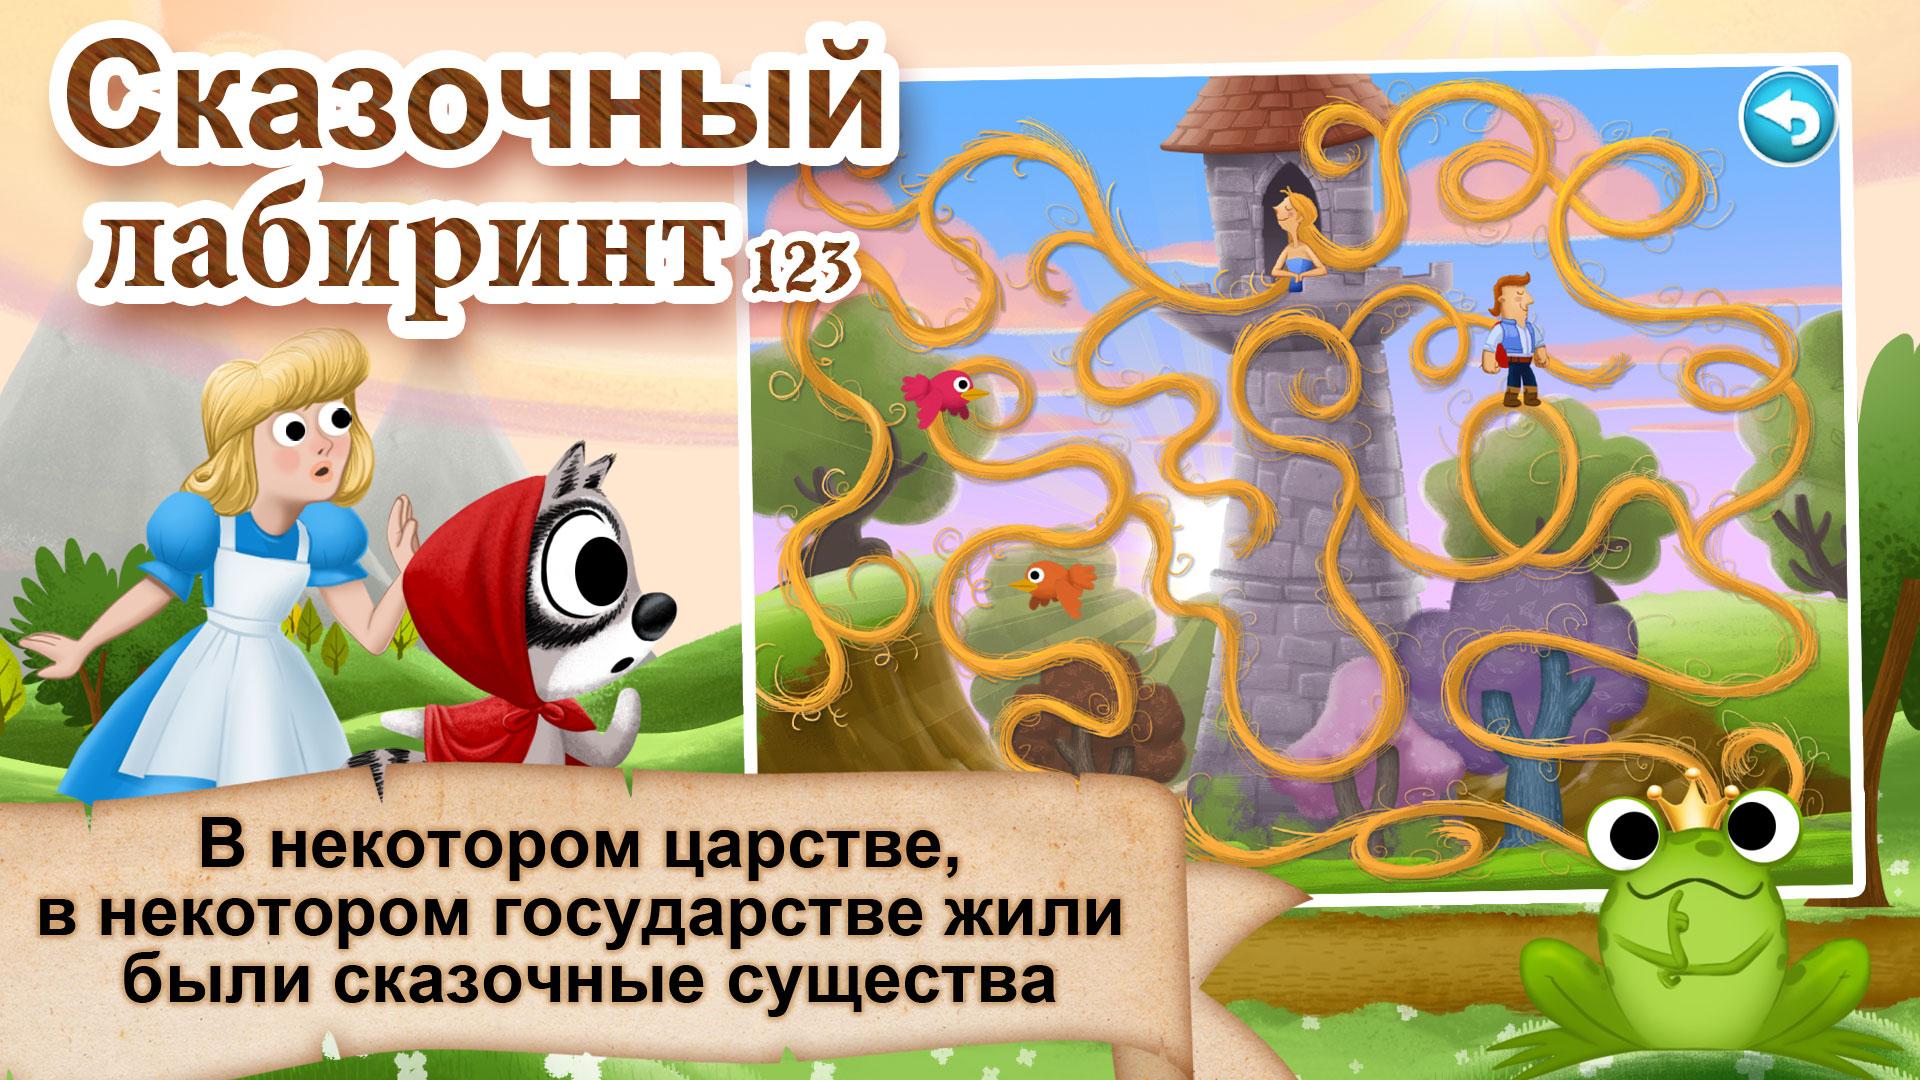 Android application Fairytale Maze 123 for Kids HD screenshort